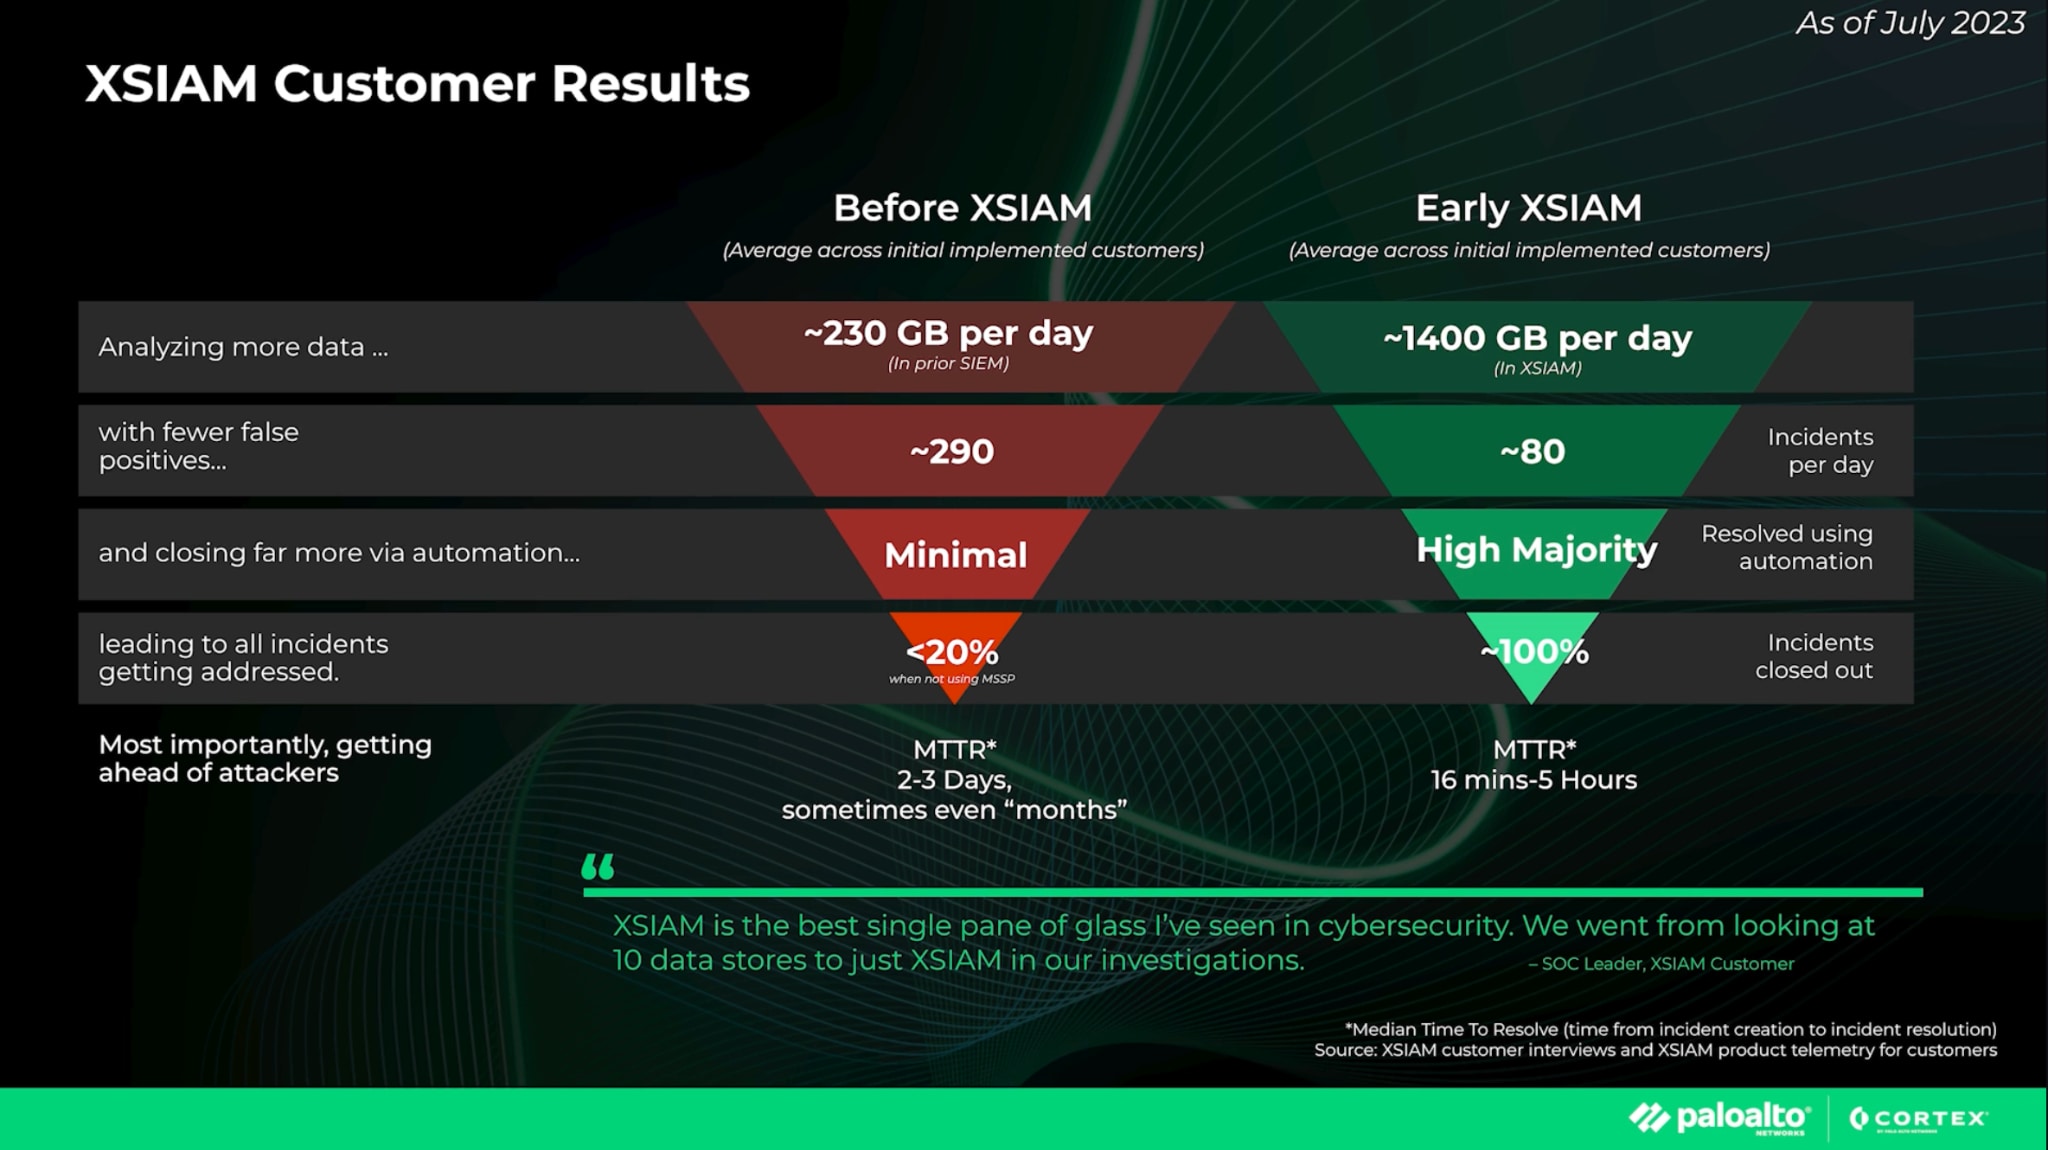 XSIAM Customer Results, before and early uses.